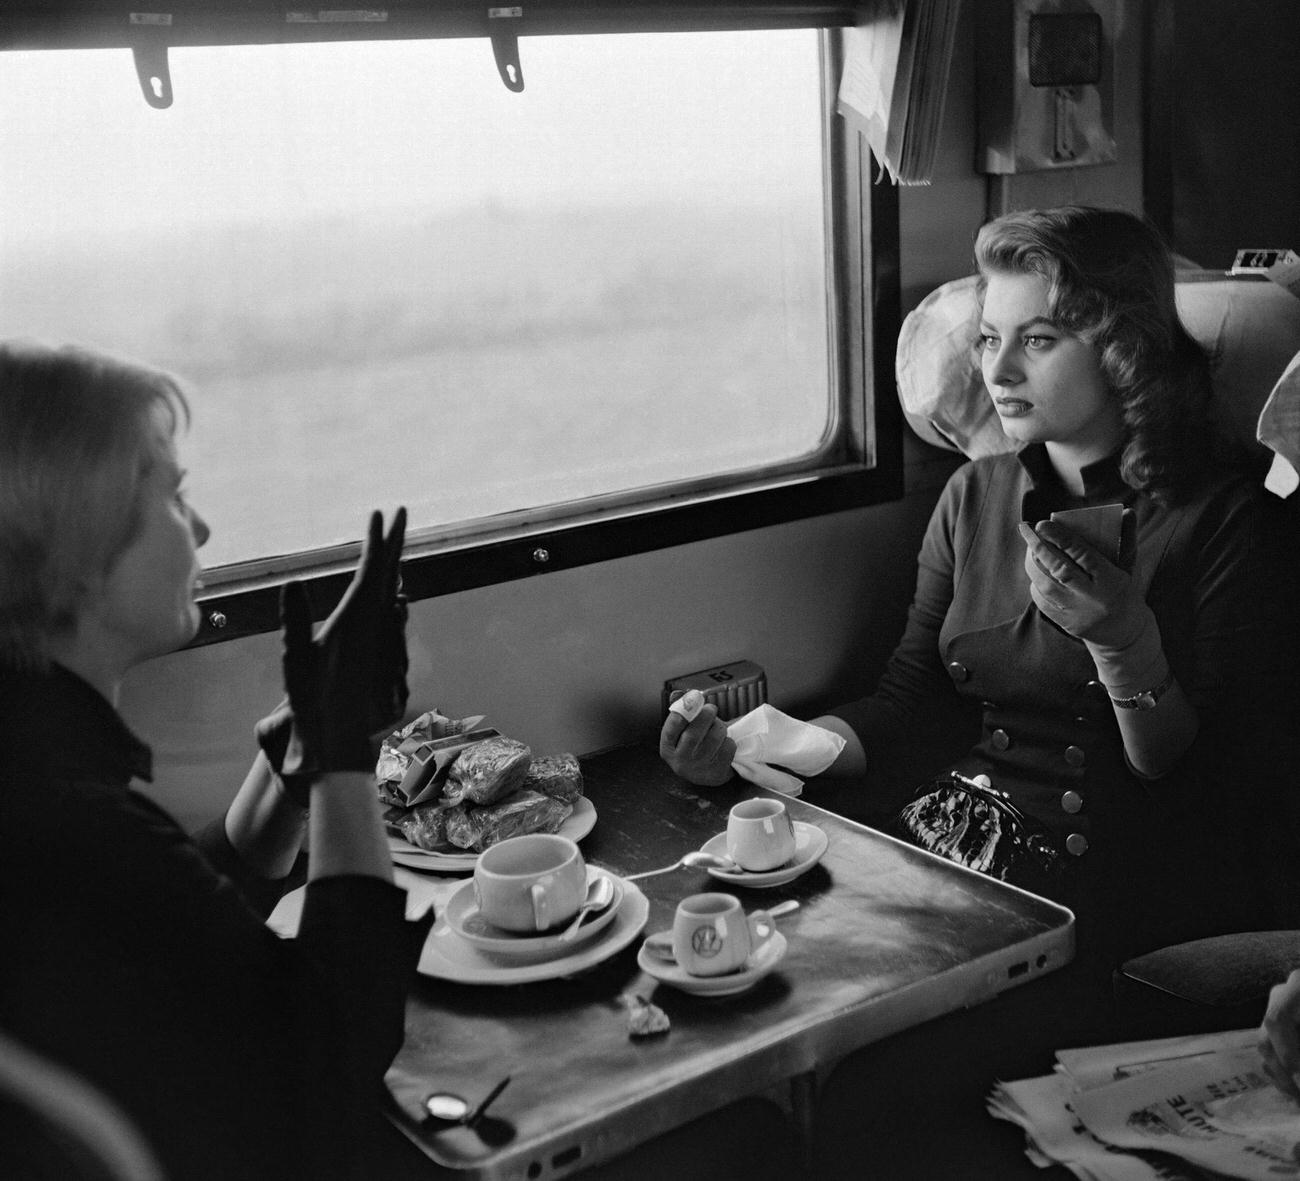 Actress Sophia Loren visits US Military Base in Italy, 1950. The actress having breakfast in the train, fifties.